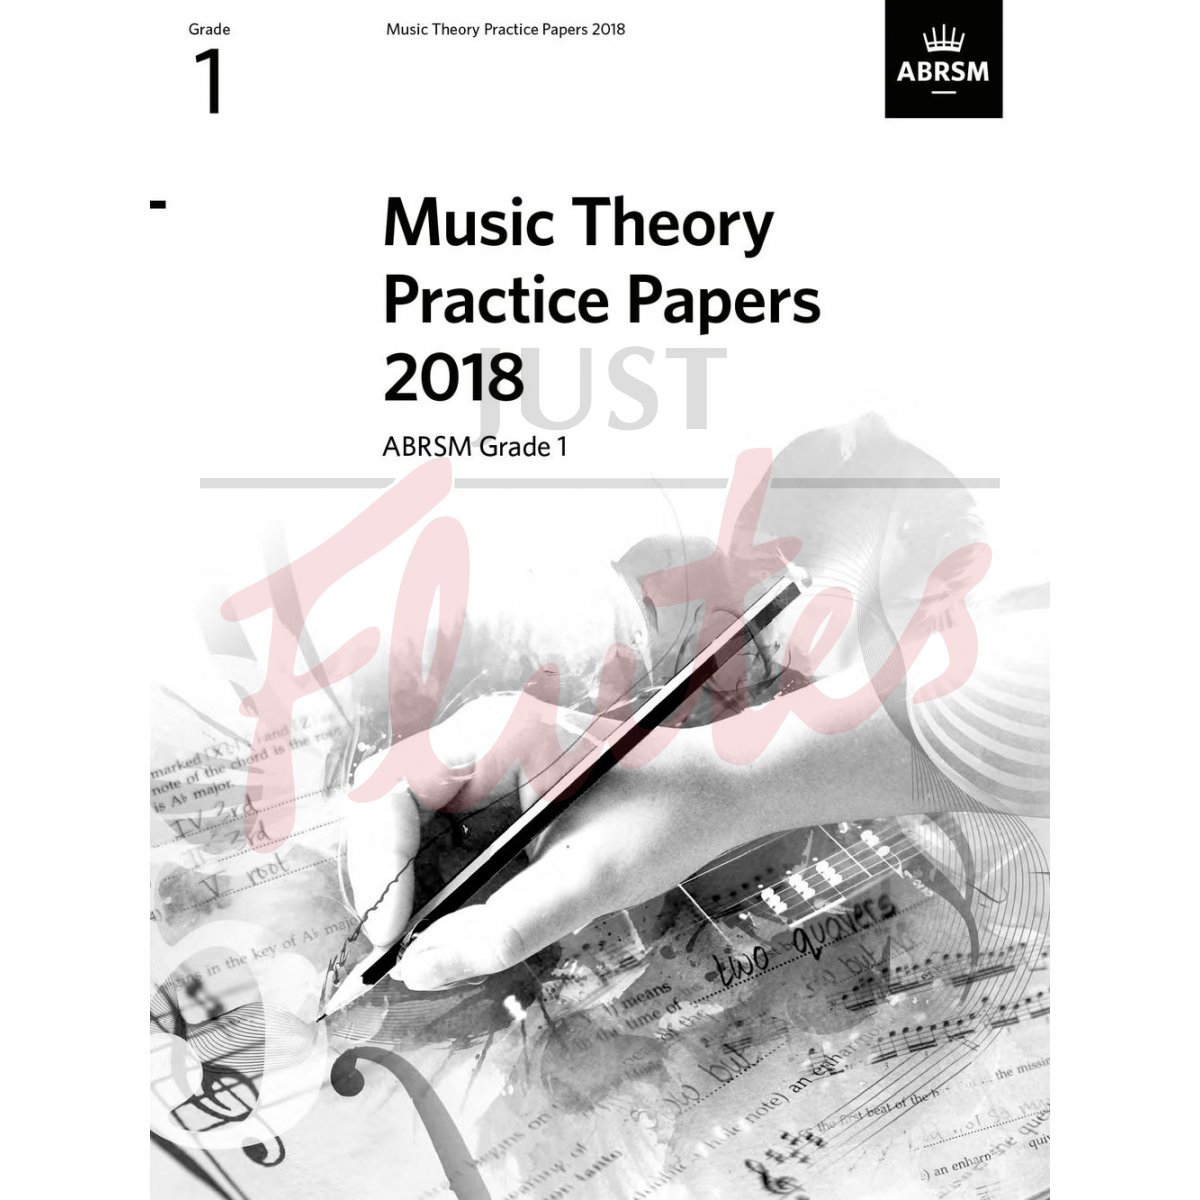 Music Theory Practice Papers 2018 Grade 1